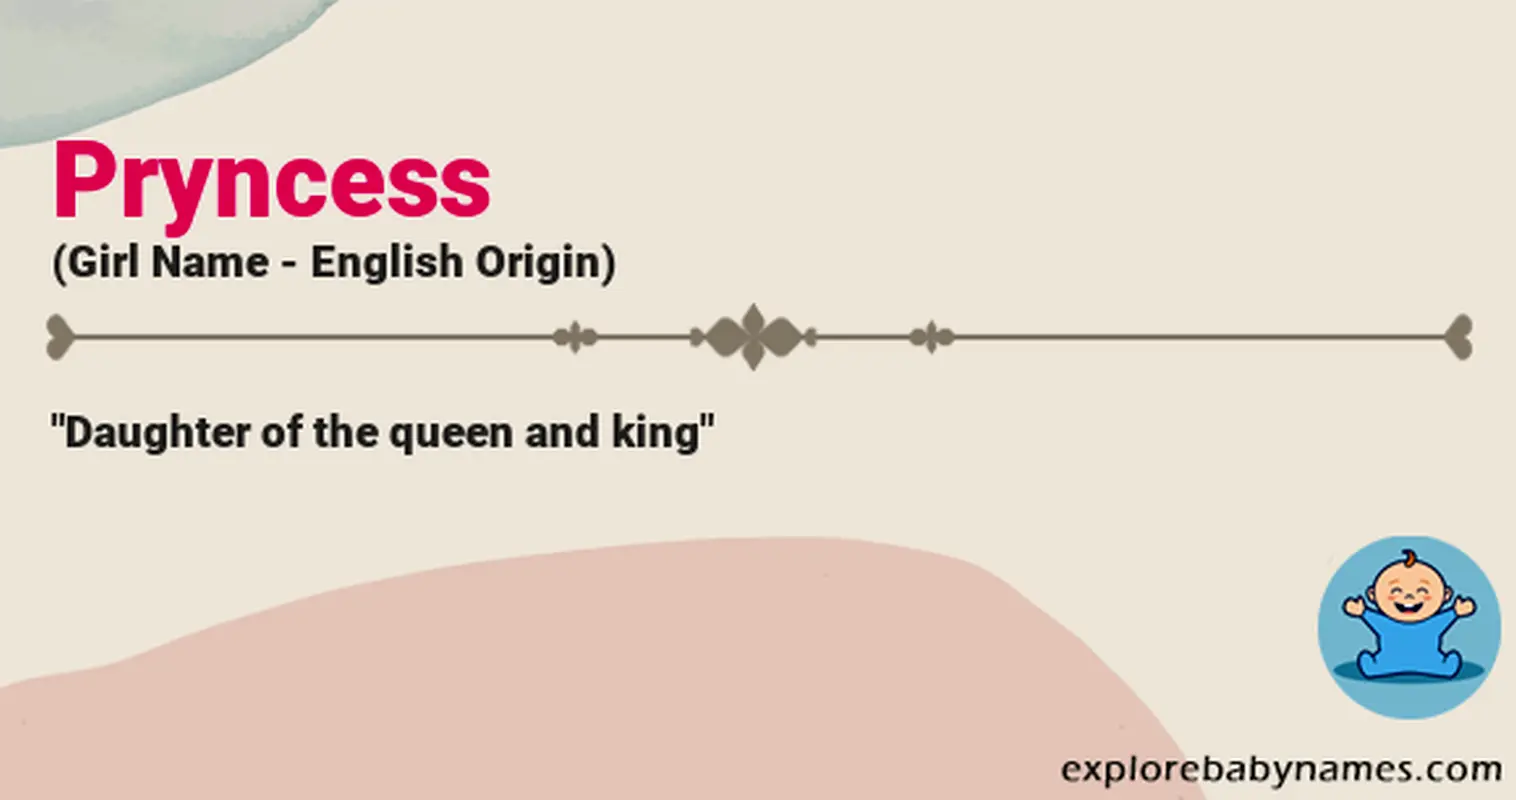 Meaning of Pryncess